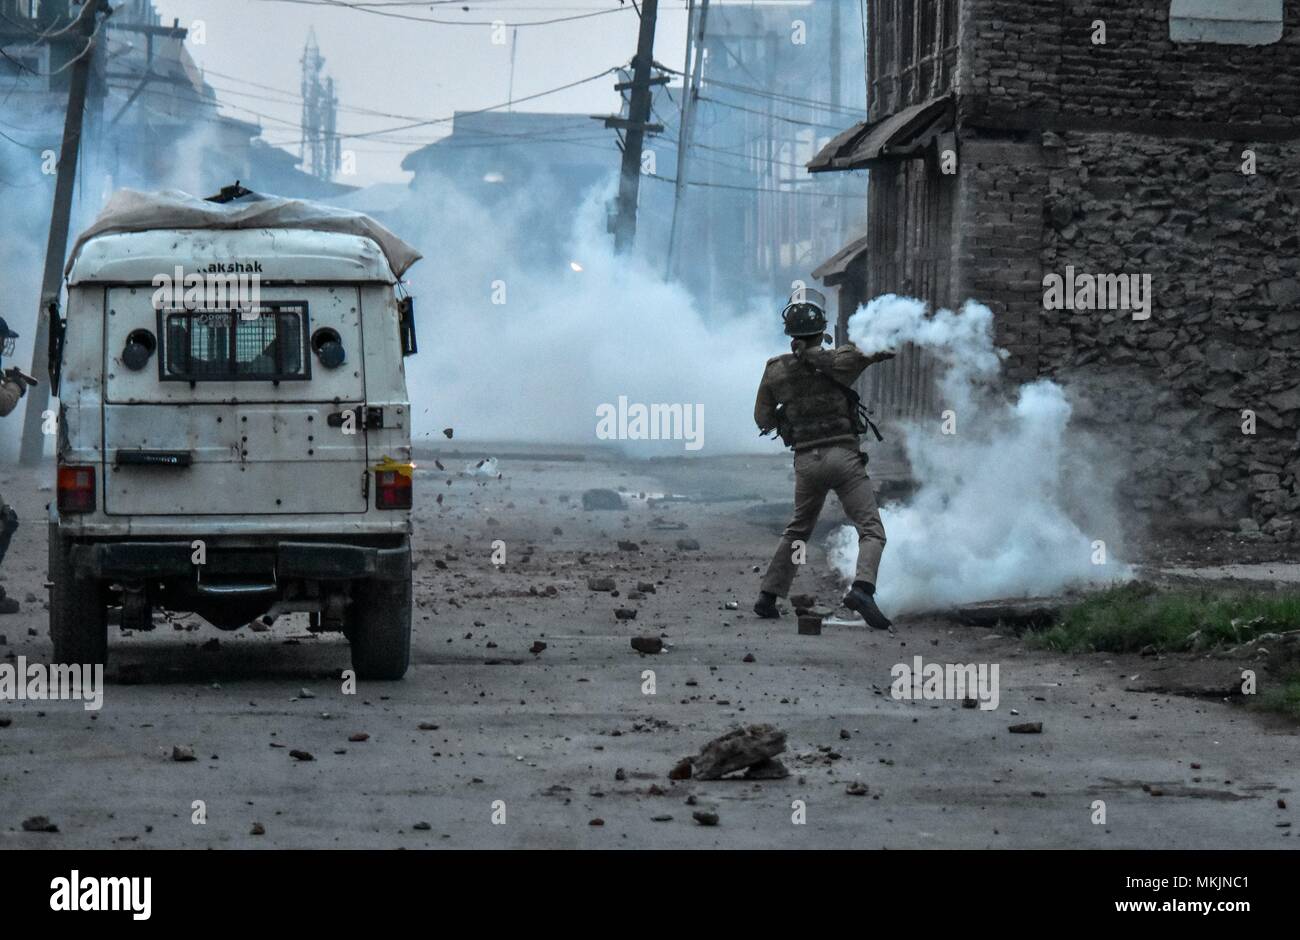 May 8, 2018 - Srinagar, J&K, India - An Indian policeman throws a tear gas canister back towards Kashmiri protesters during clashes in Srinagar, Indian administered Kashmir. Fierce clashes broke out between government forces and Kashmiri protesters in Srinagar on Tuesday as the valley continued to remain tense over the killing of 11 people including 5 militants and 6 civilians in Indian administered Kashmir. Police used tear smoke shells and shot gun pellets to disperse hundreds of demonstrators who hurled rocks and chanted anti-Indian and pro-freedom slogans. (Credit Image: © Saqib Majeed/SOP Stock Photo